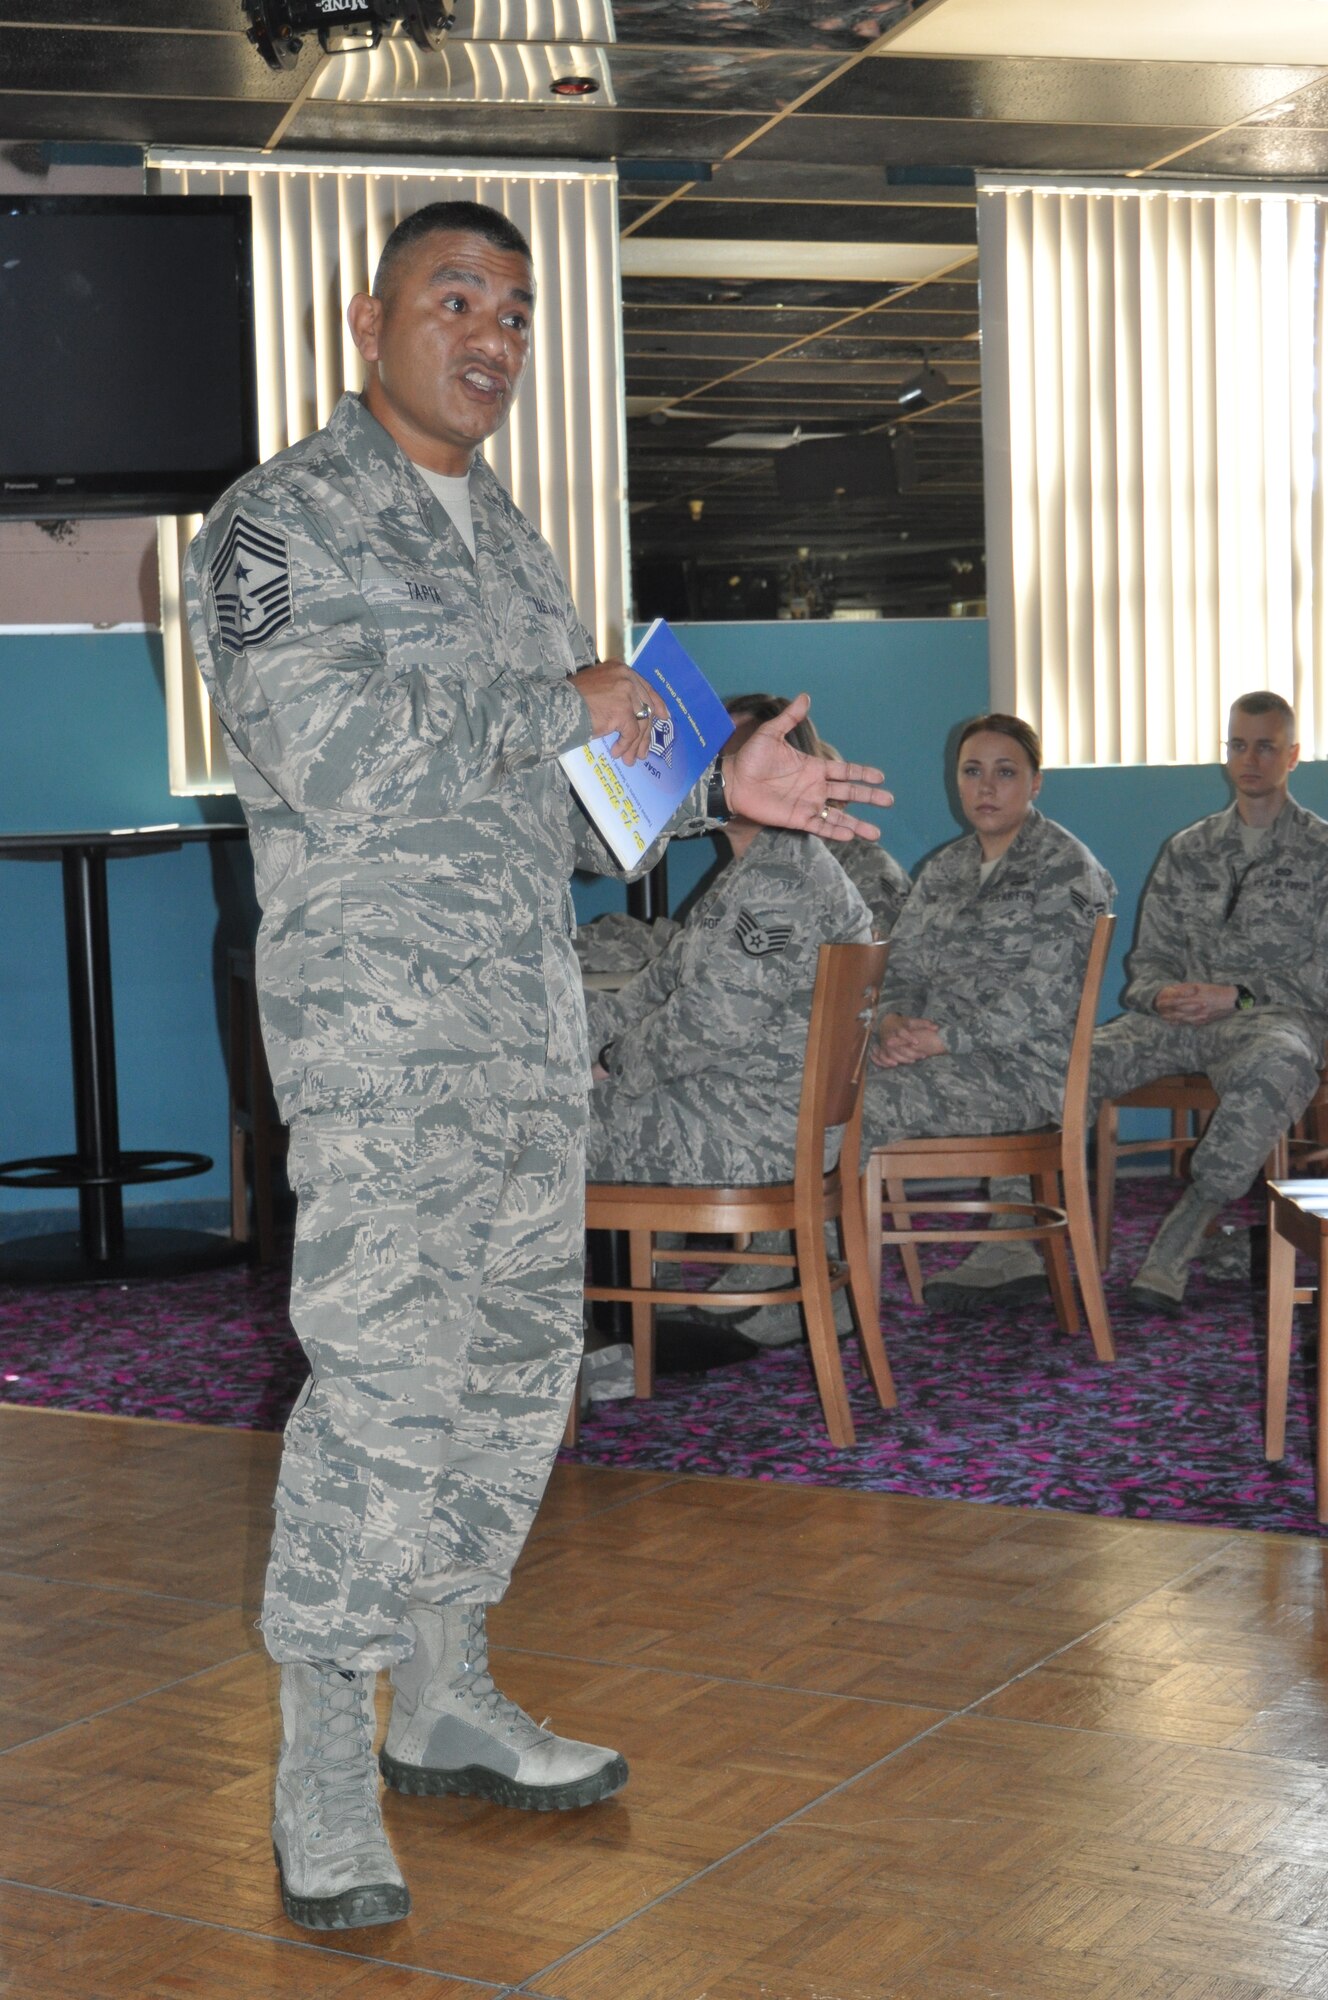 12th Air Force (Air Forces Southern) held professional develop seminars today as part of their 70th Anniversary Celebration here, Aug. 24. Military members and civilian guests participated in a “Lessons learned on Leadership” seminar led by various 12th AF wing commanders, an “Enlisted leaders in actions” seminar led by various 12th AF command chiefs, a “Servant leadership” seminar led by Chief Master Sgt. Gerardo Tapia, 12th AF (AFSOUTH) command chief, and a “Leadership Lessons from the Hanoi Hilton” seminar led by Col. (ret.) Lee Ellis. (USAF photo by Master Sgt. Kelly Ogden/Released). 